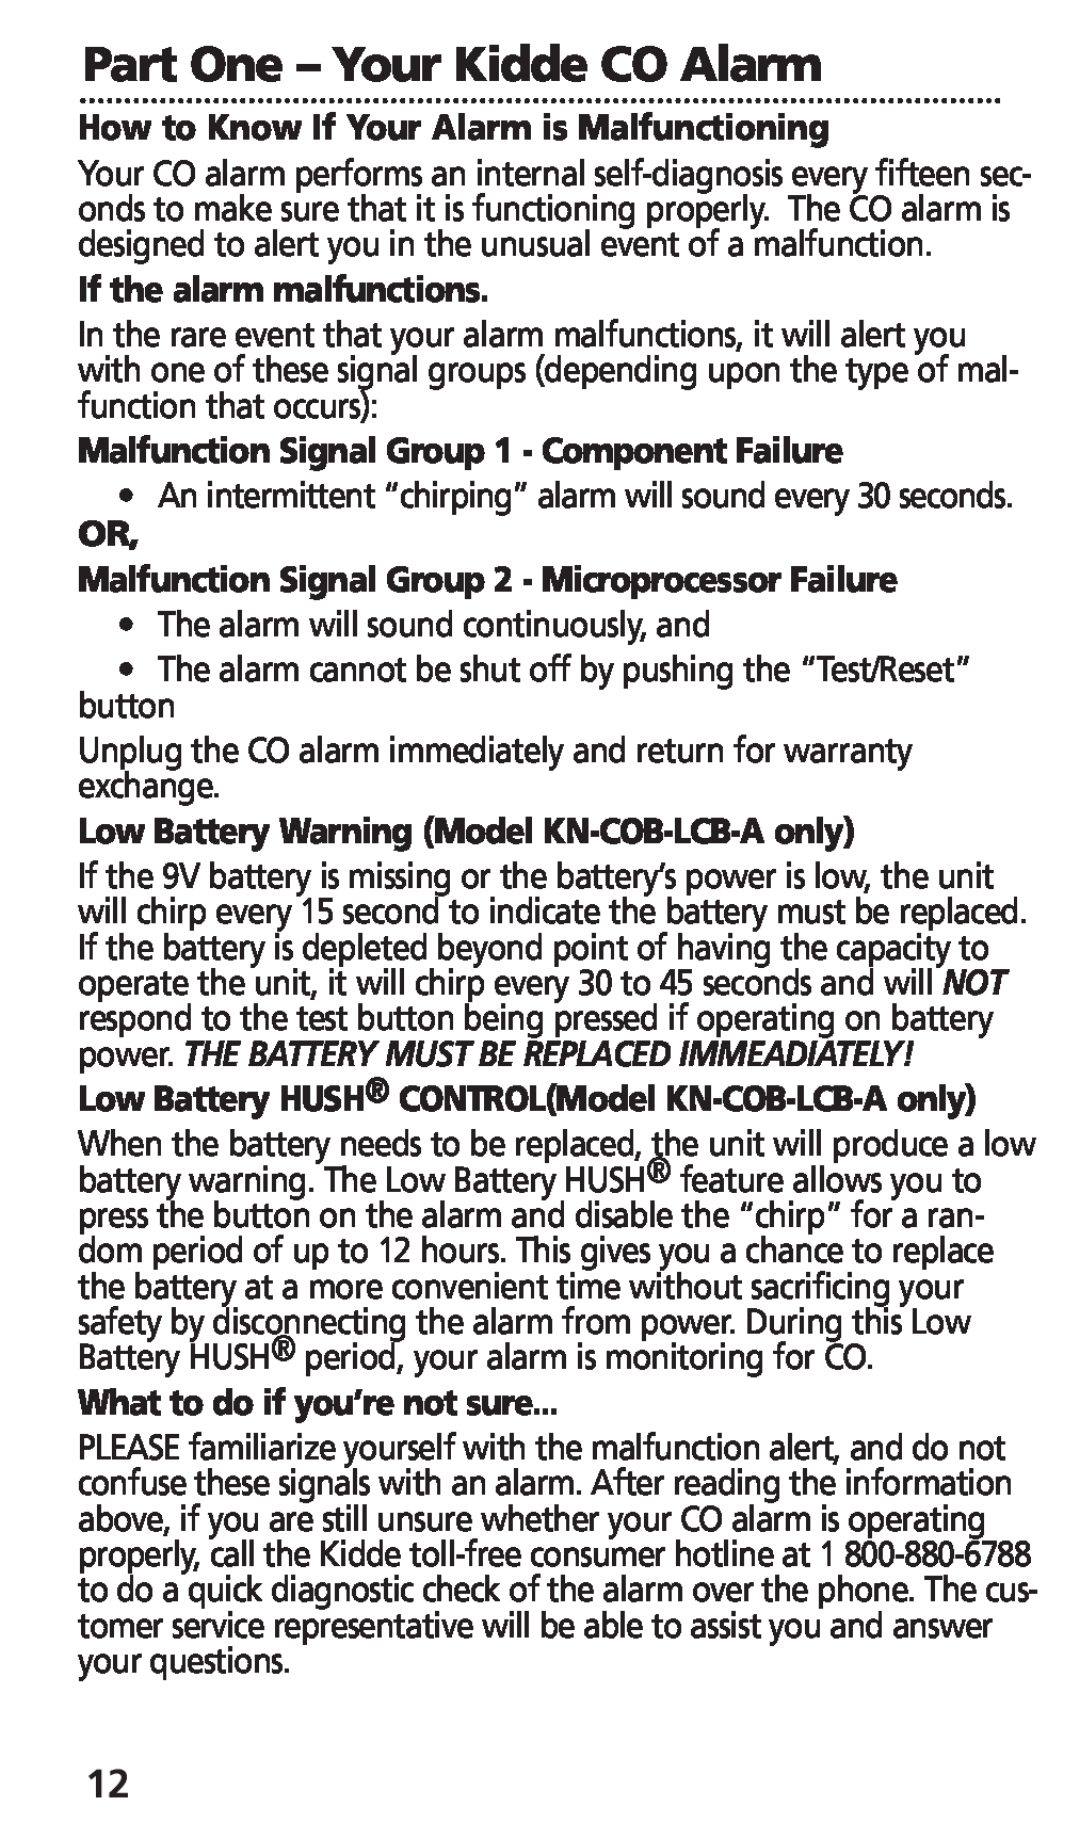 Kidde KN-COB-DP-H How to Know If Your Alarm is Malfunctioning, If the alarm malfunctions, What to do if you’re not sure 